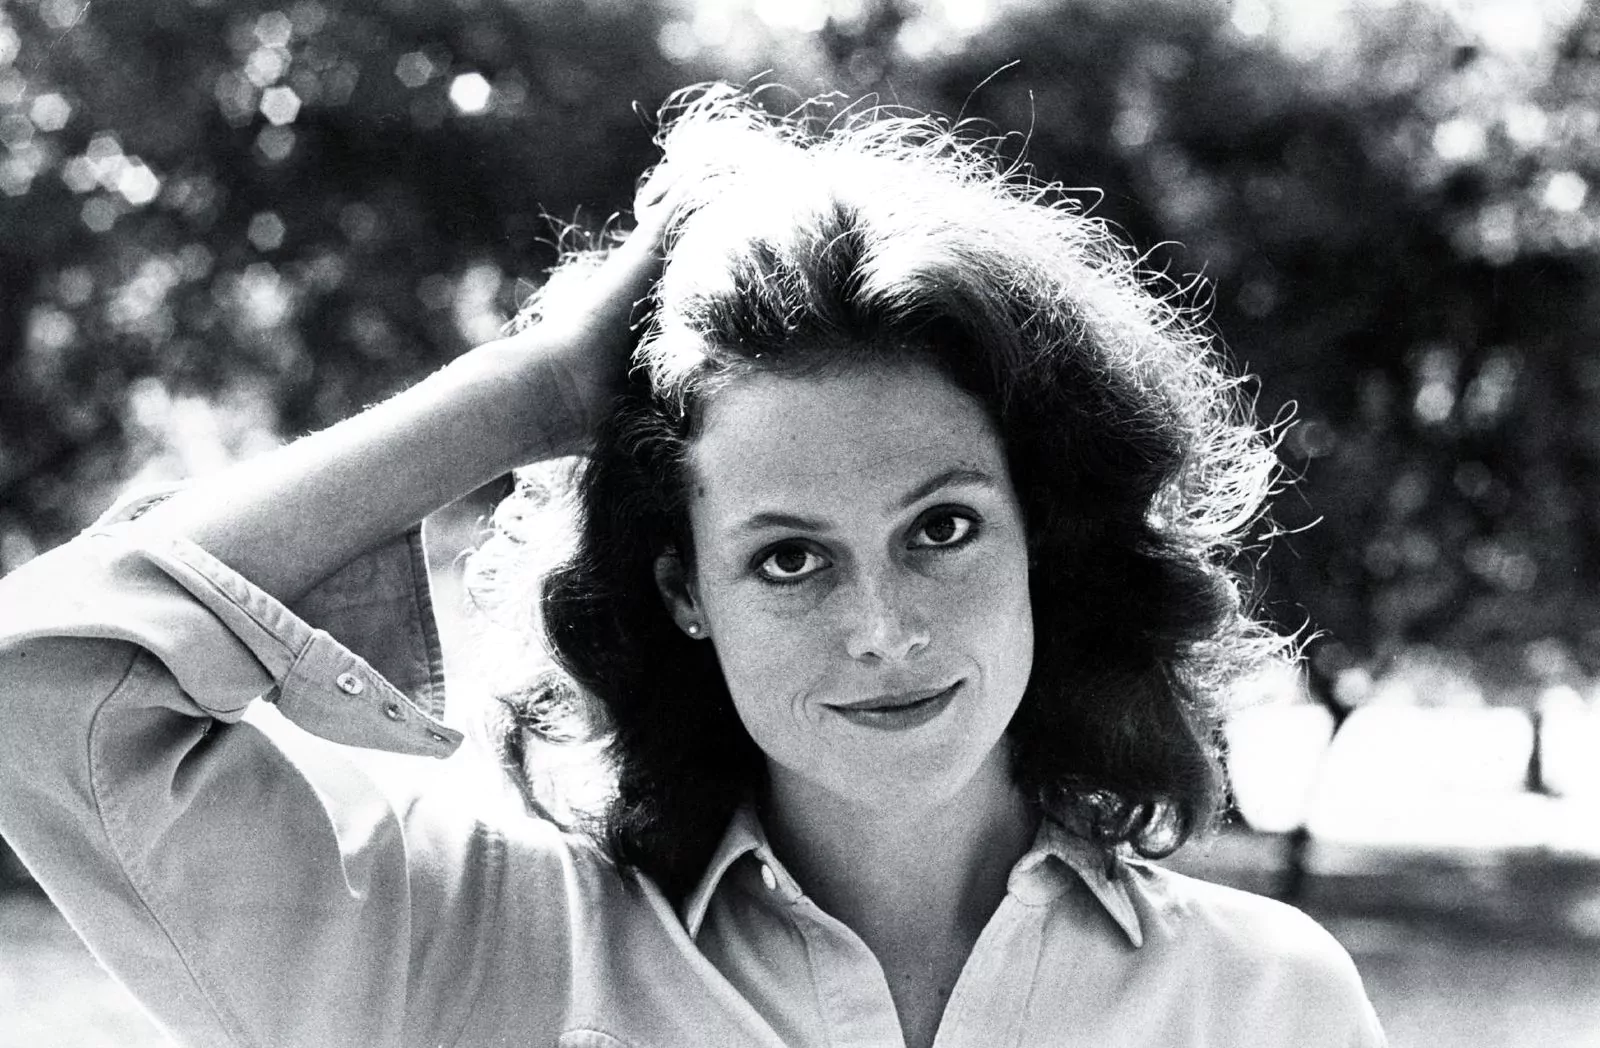 Sigourney Weaver in The Year of Dangerous Life, 1982